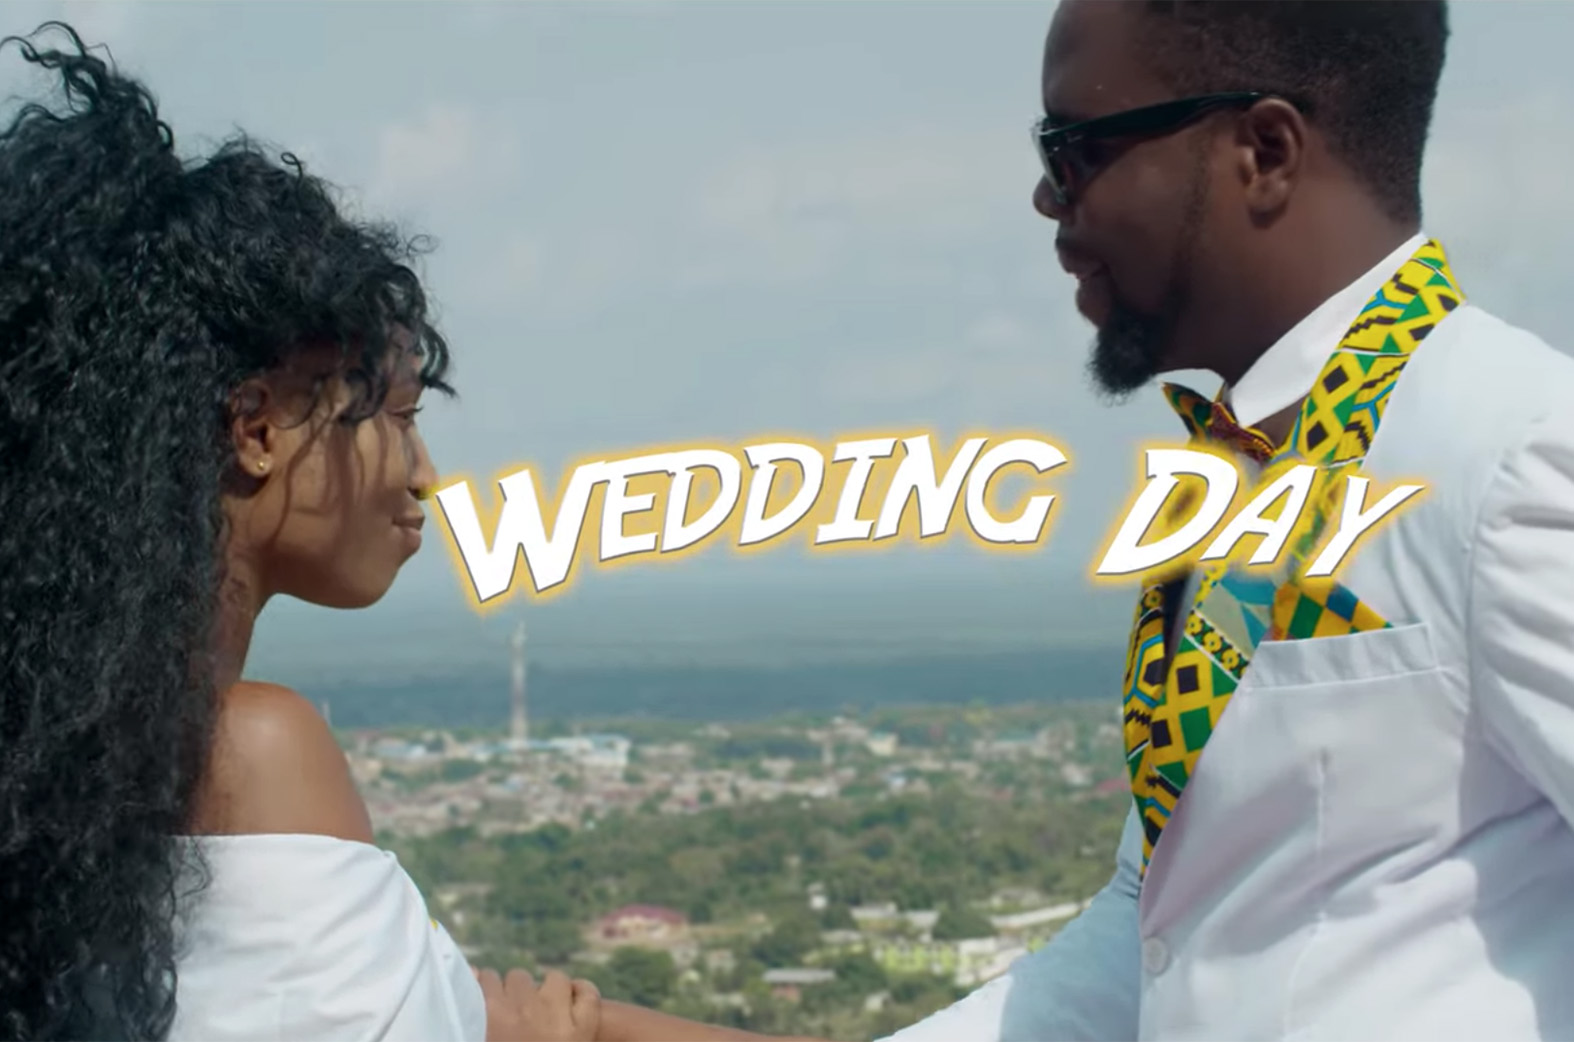 Video: Wedding Day by Vibration feat. Kd Bakes